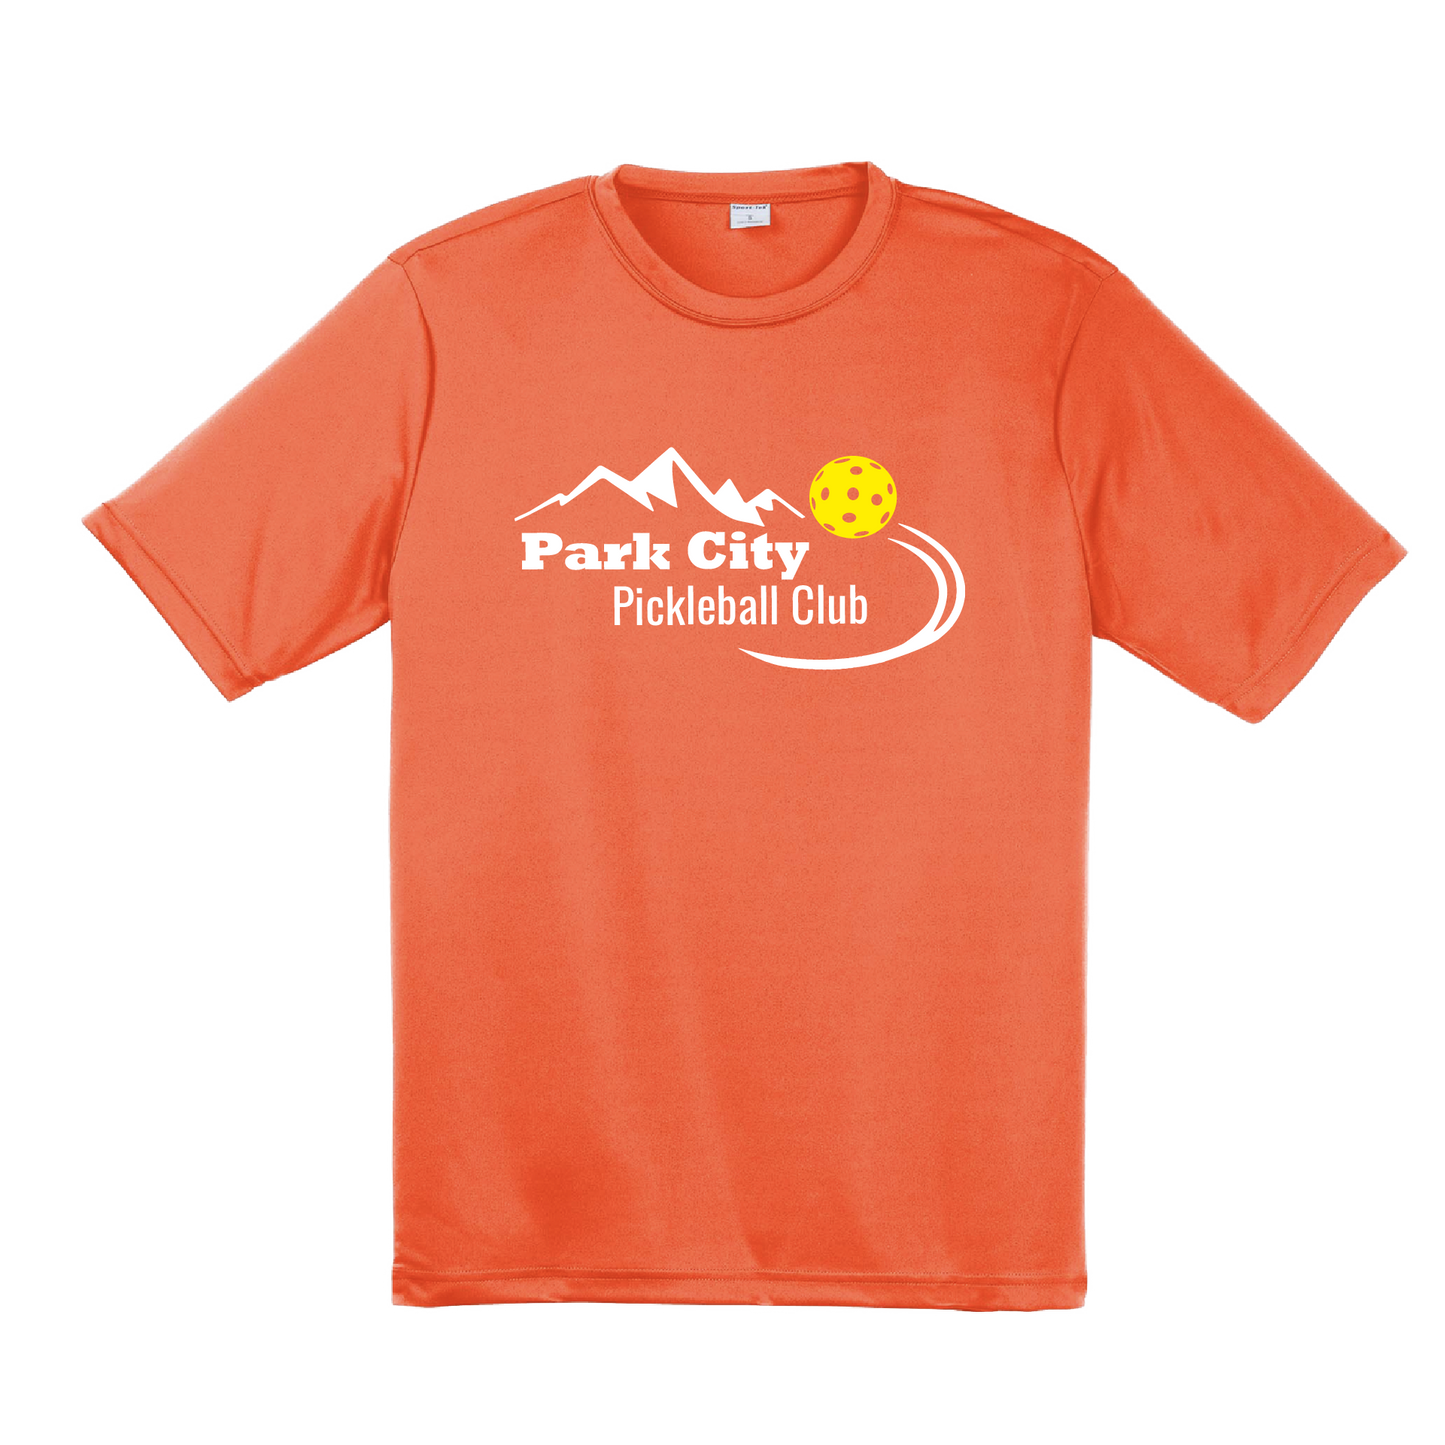 Pickleball Design: Park City Pickleball Club (white words)  Men's Style: Short Sleeved   Shirts are lightweight, roomy and highly breathable. These moisture-wicking shirts are designed for athletic performance. They feature PosiCharge technology to lock in color and prevent logos from fading. Removable tag and set-in sleeves for comfort.